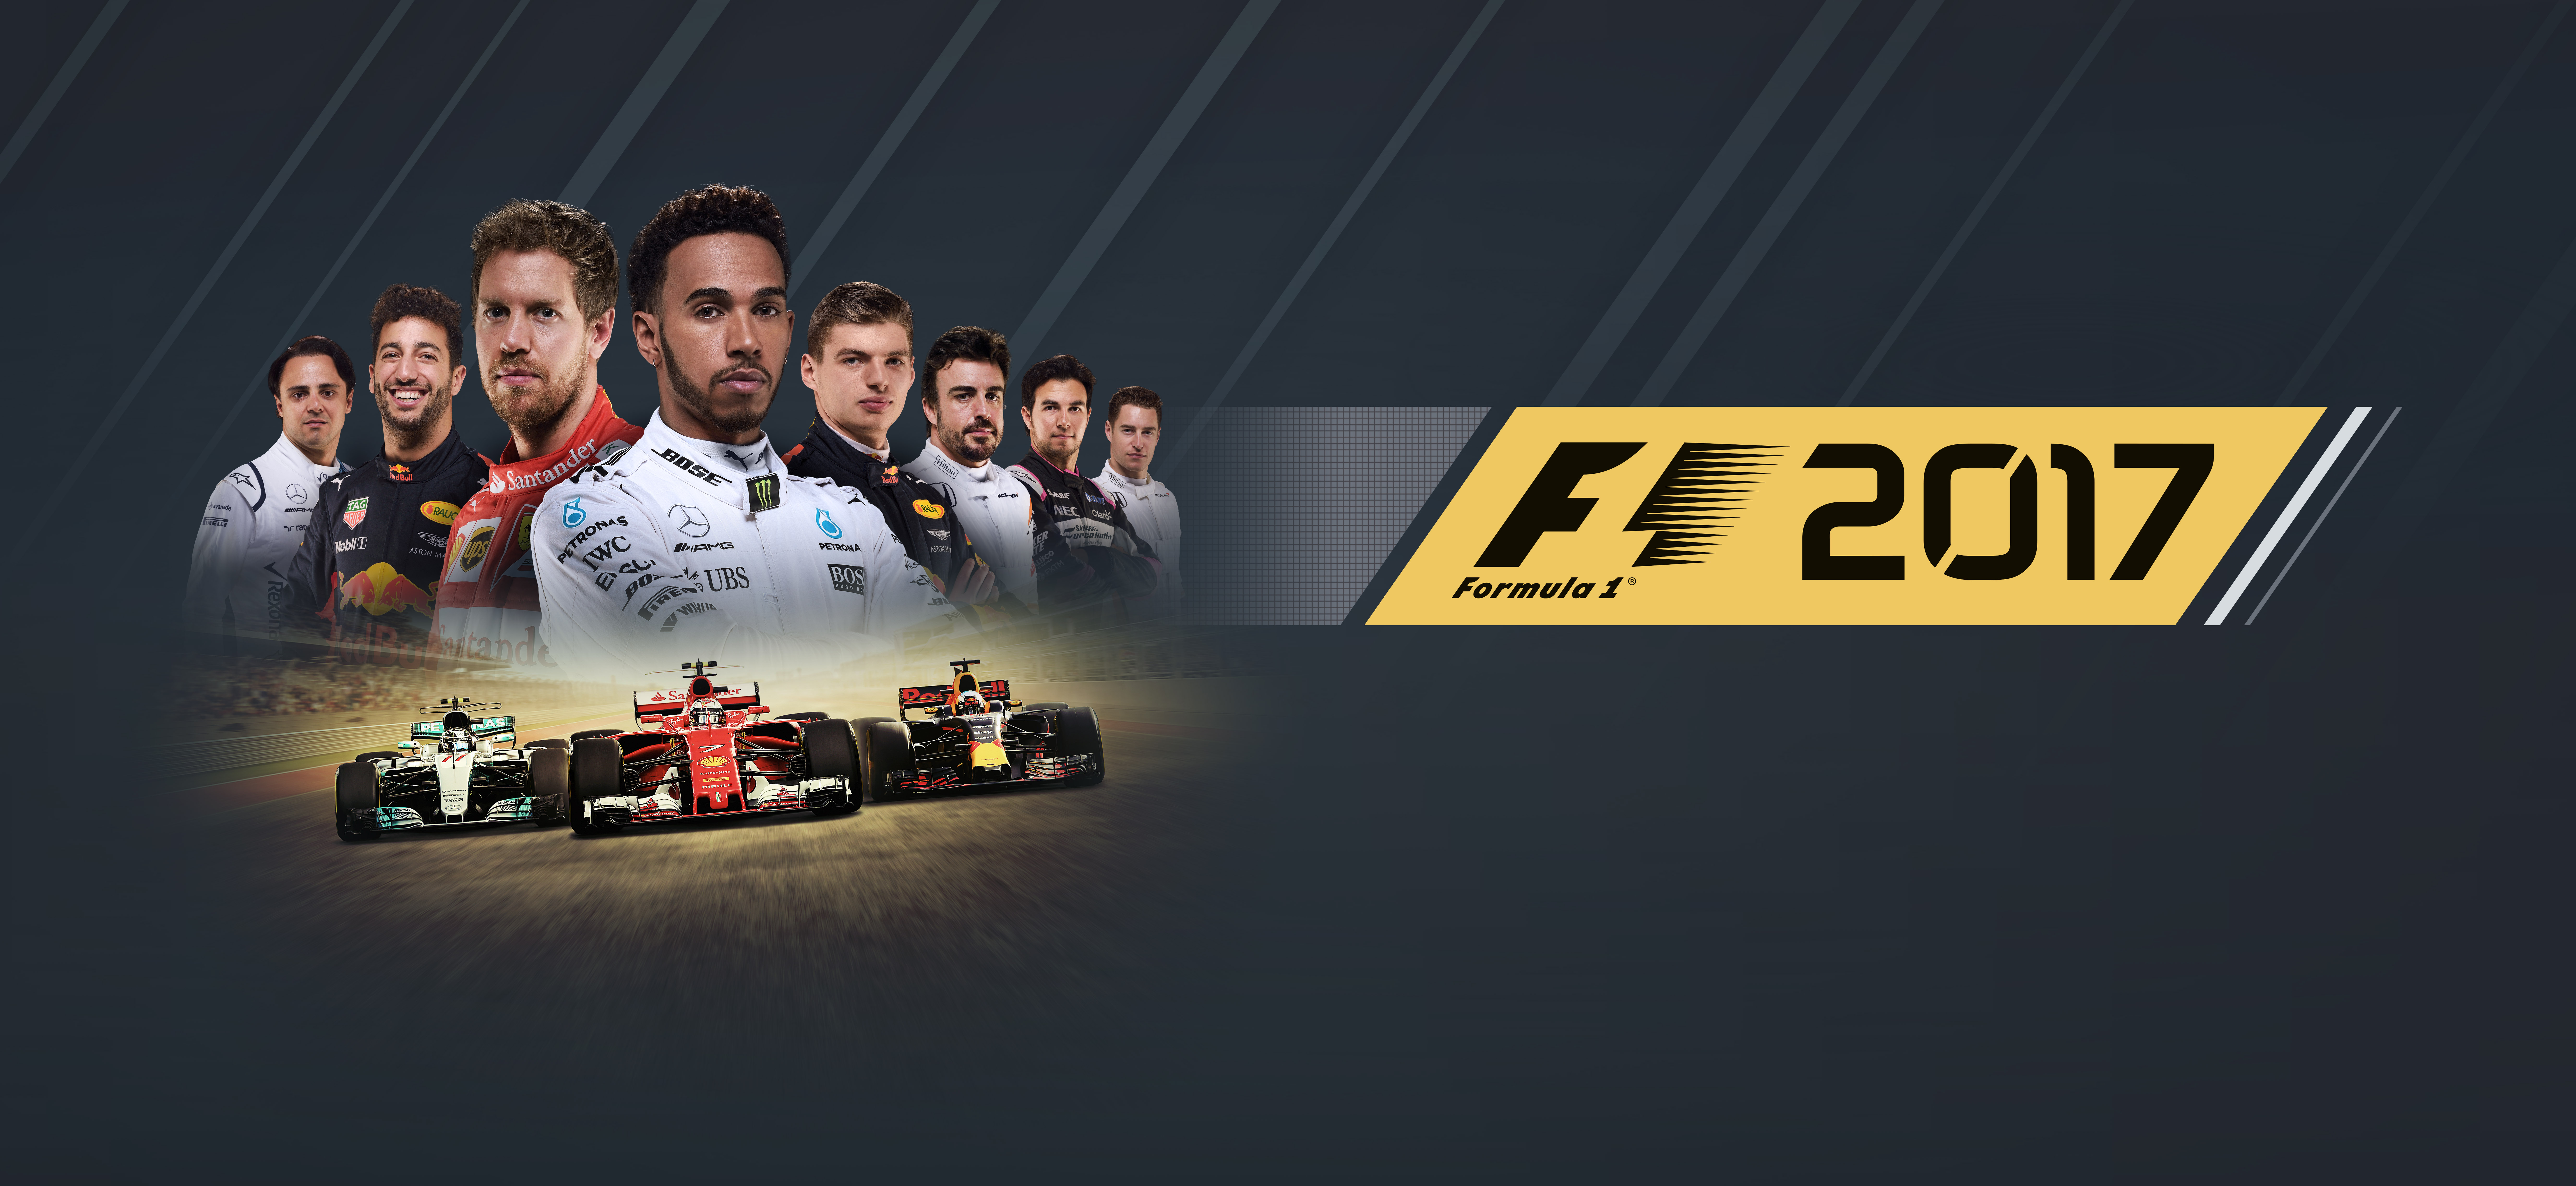 Get The Lowdown On Our Steelbook For F1 Codemasters